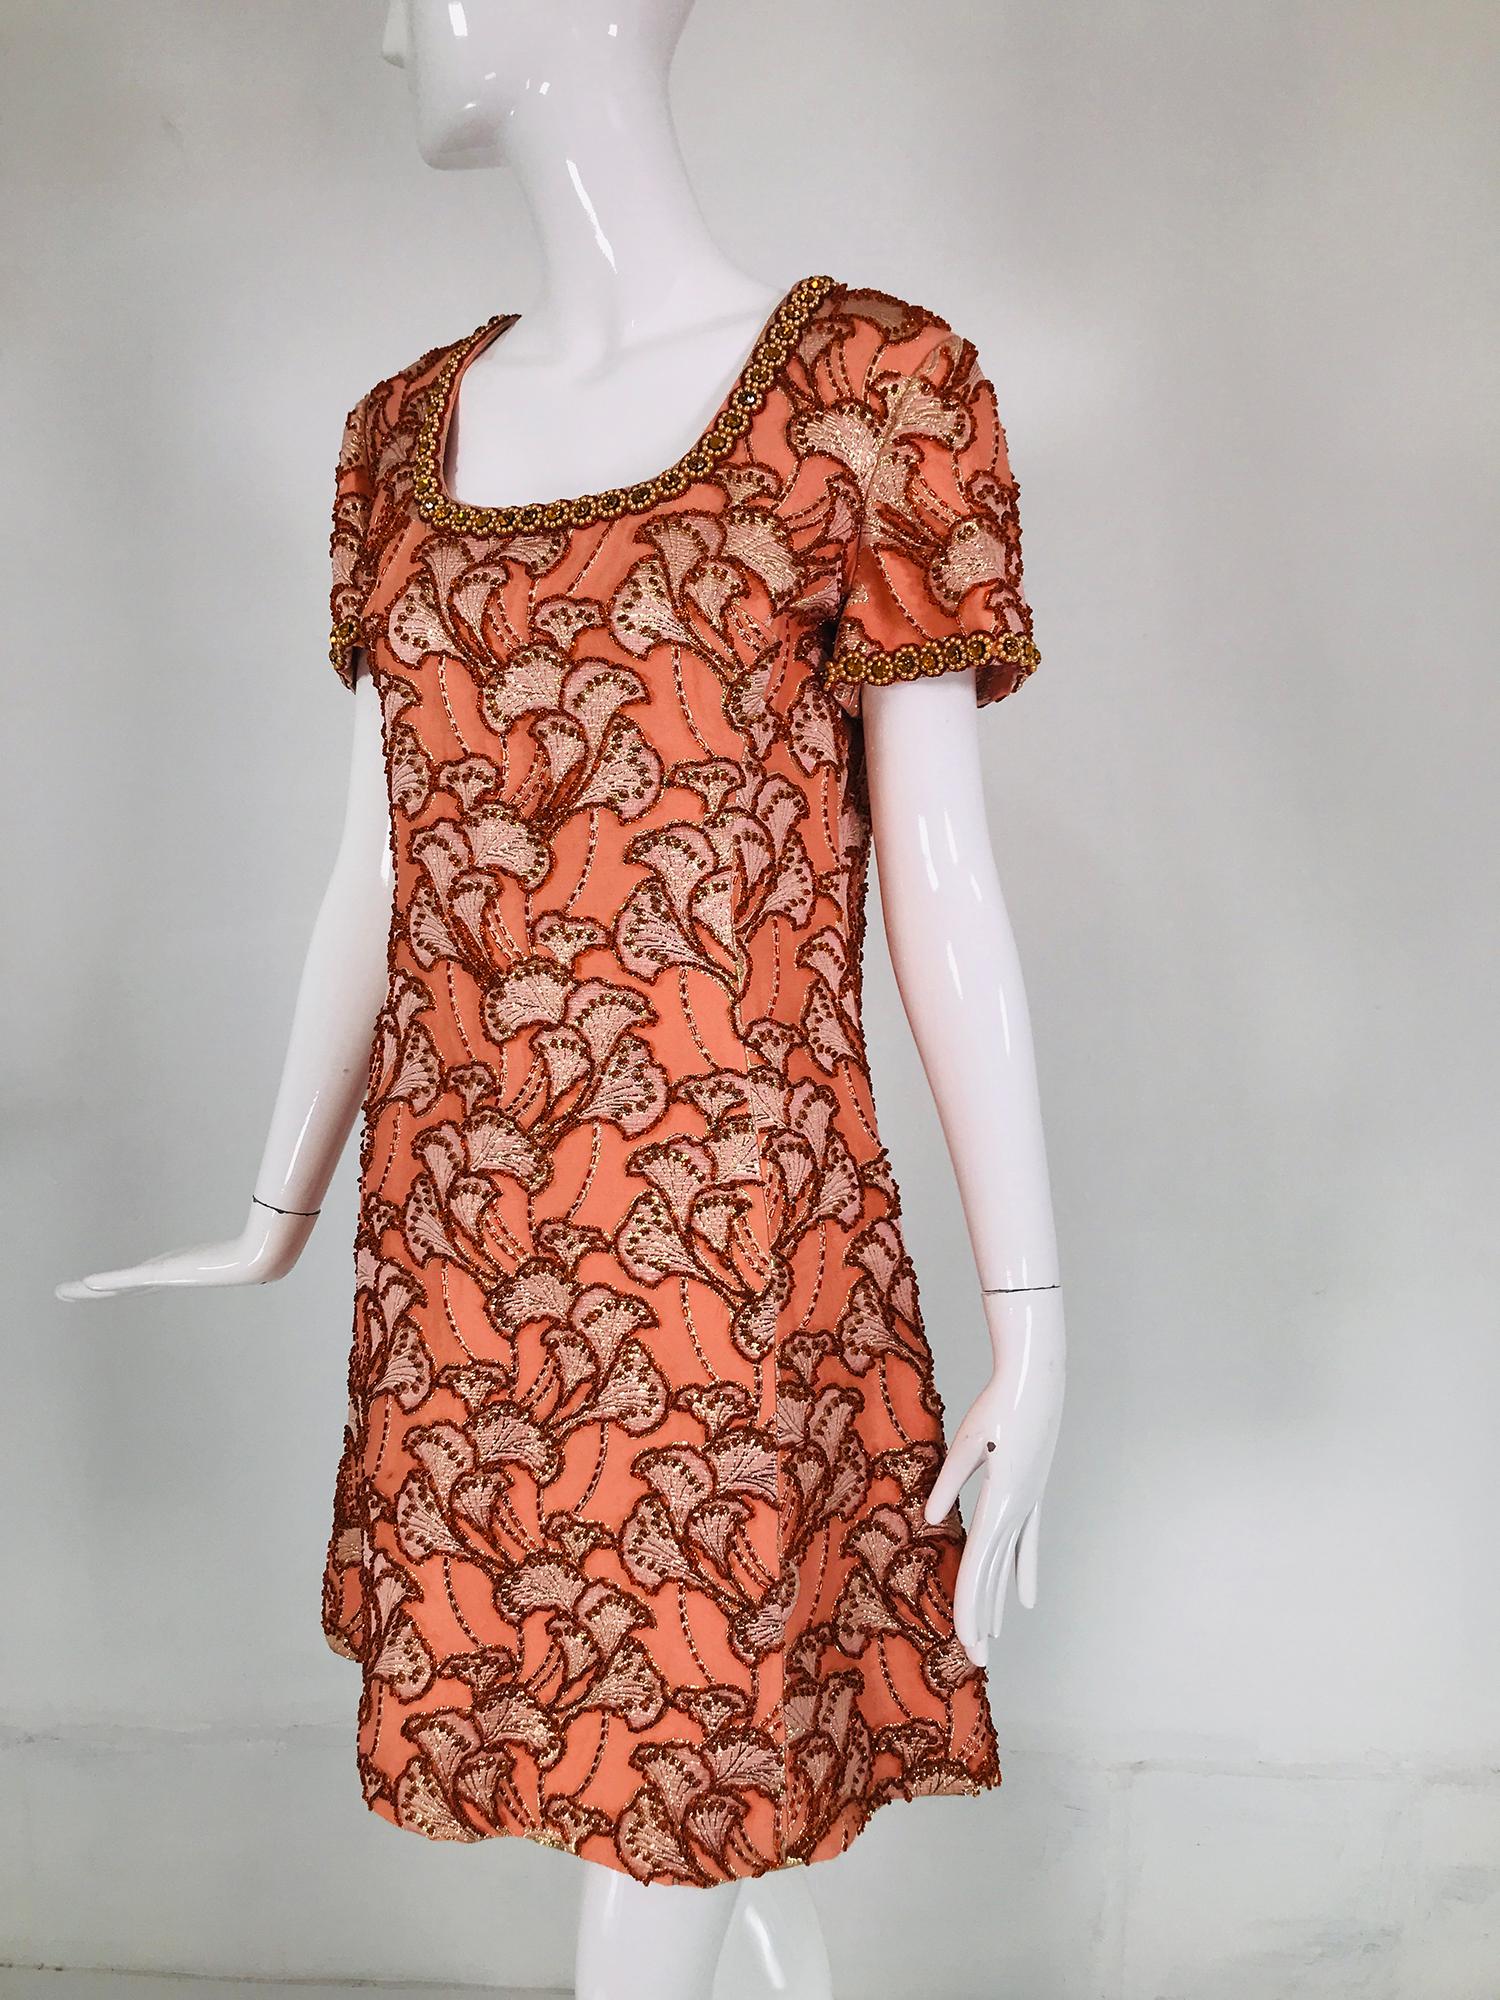 1960s coral silk brocade, hand beaded 1960s mini dress by Royal Cathay, Hong Kong. Scoop neck, short sleeve princess seam dress with a jewel neckline and sleeve cuffs with pearls and prong set orange faceted rhinestones. The dress has gold metallic